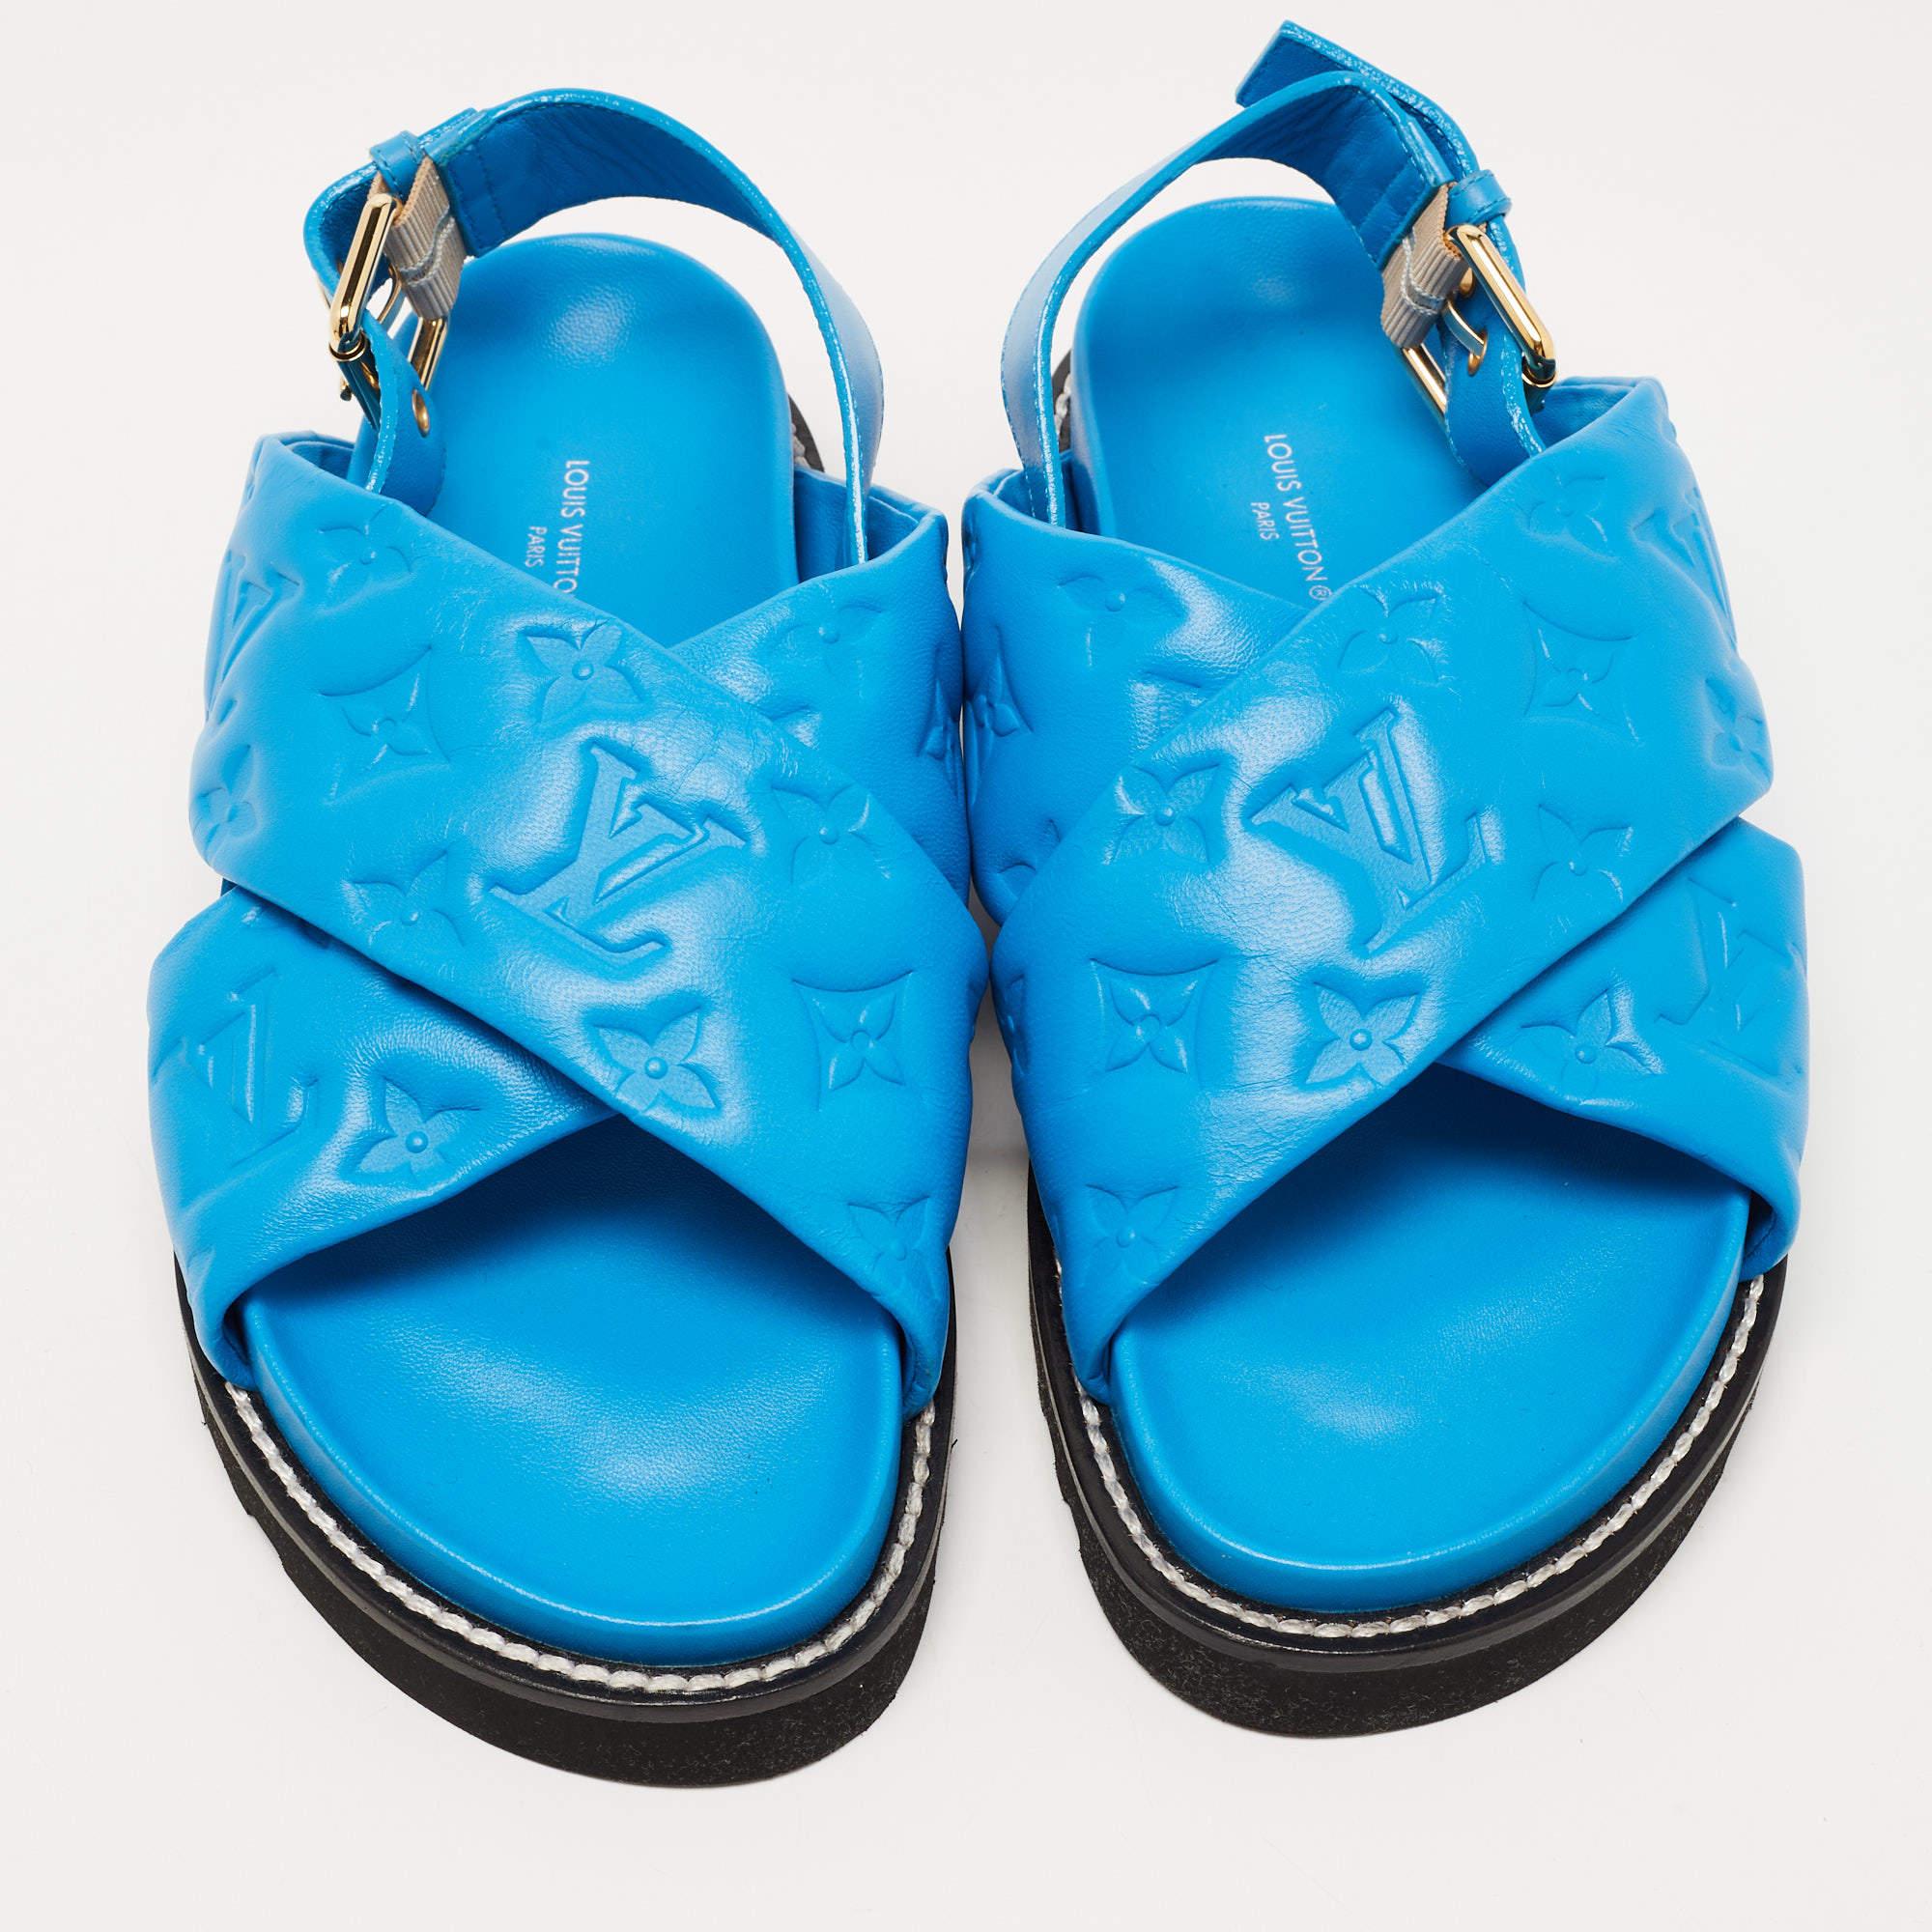 Crafted from premium blue leather, these sandals feature a sleek sling-back design for a secure fit. With their comfortable soles and signature Louis Vuitton branding, they effortlessly combine fashion and comfort for the modern woman.

Includes: